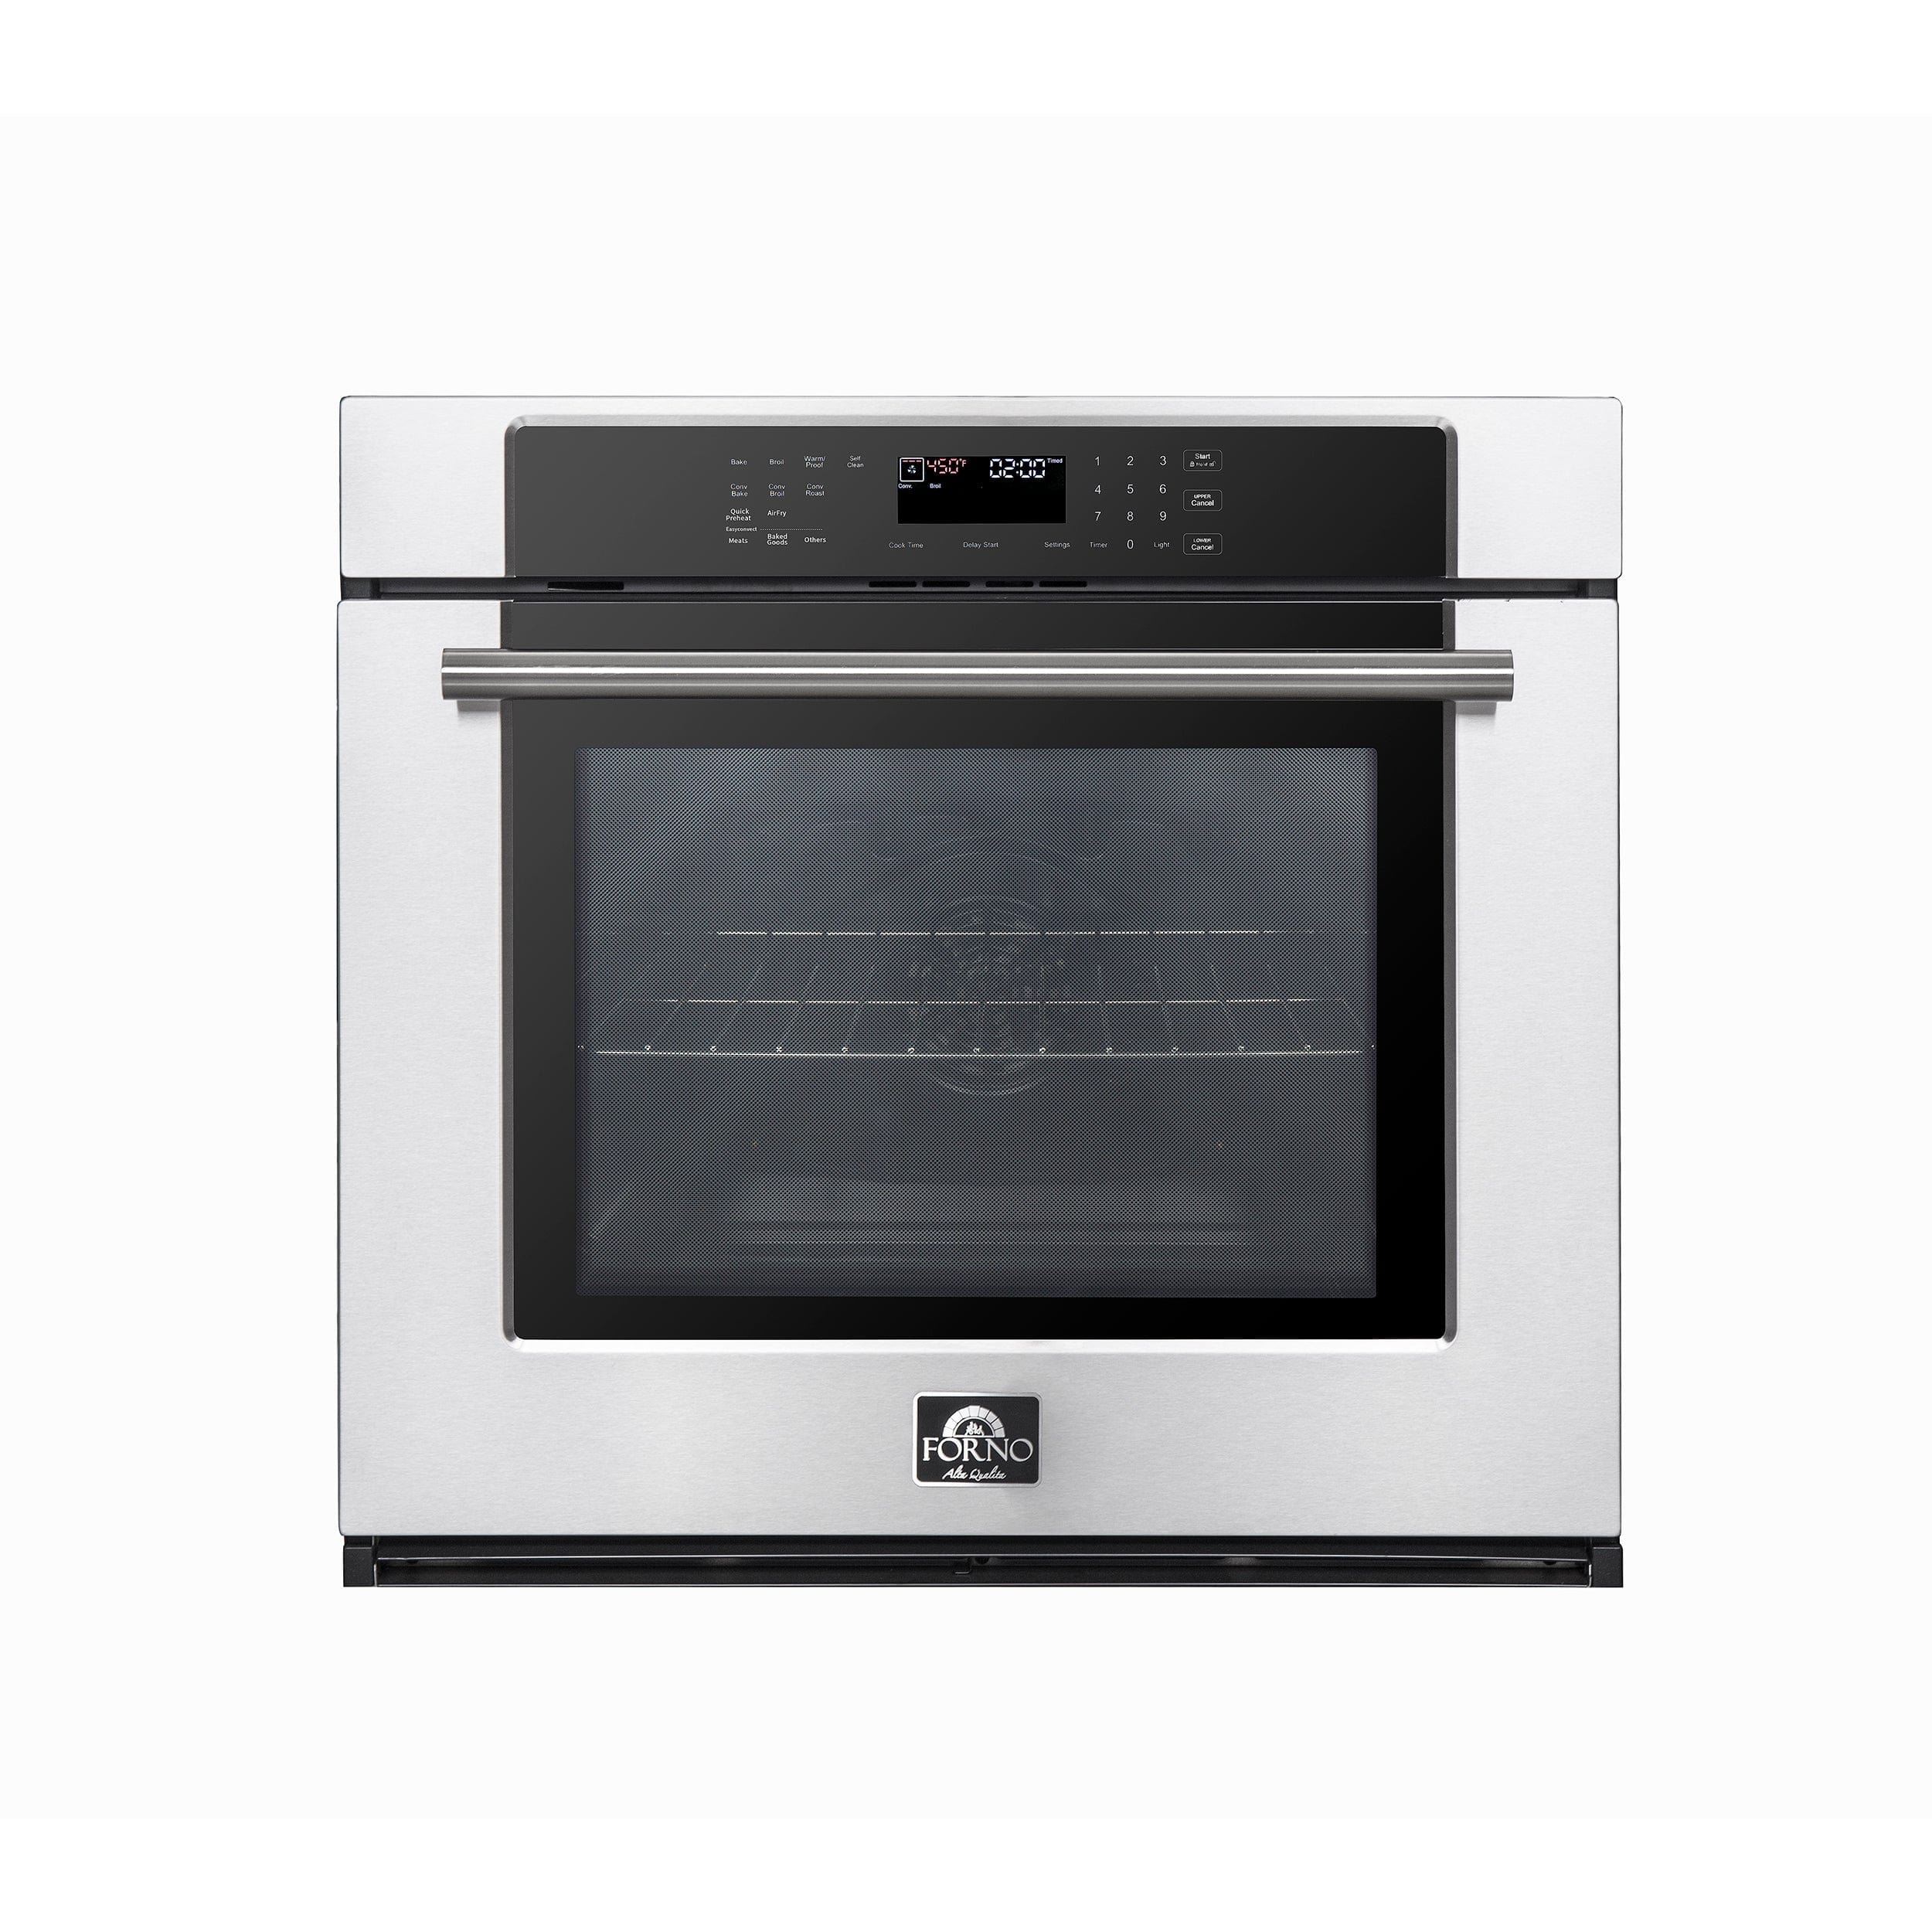 Forno 30" Built-In Single Wall Oven In Stainless Steel with Self-Clean, FBOEL1358-30 Wall Oven FBOEL1358-30 Luxury Appliances Direct